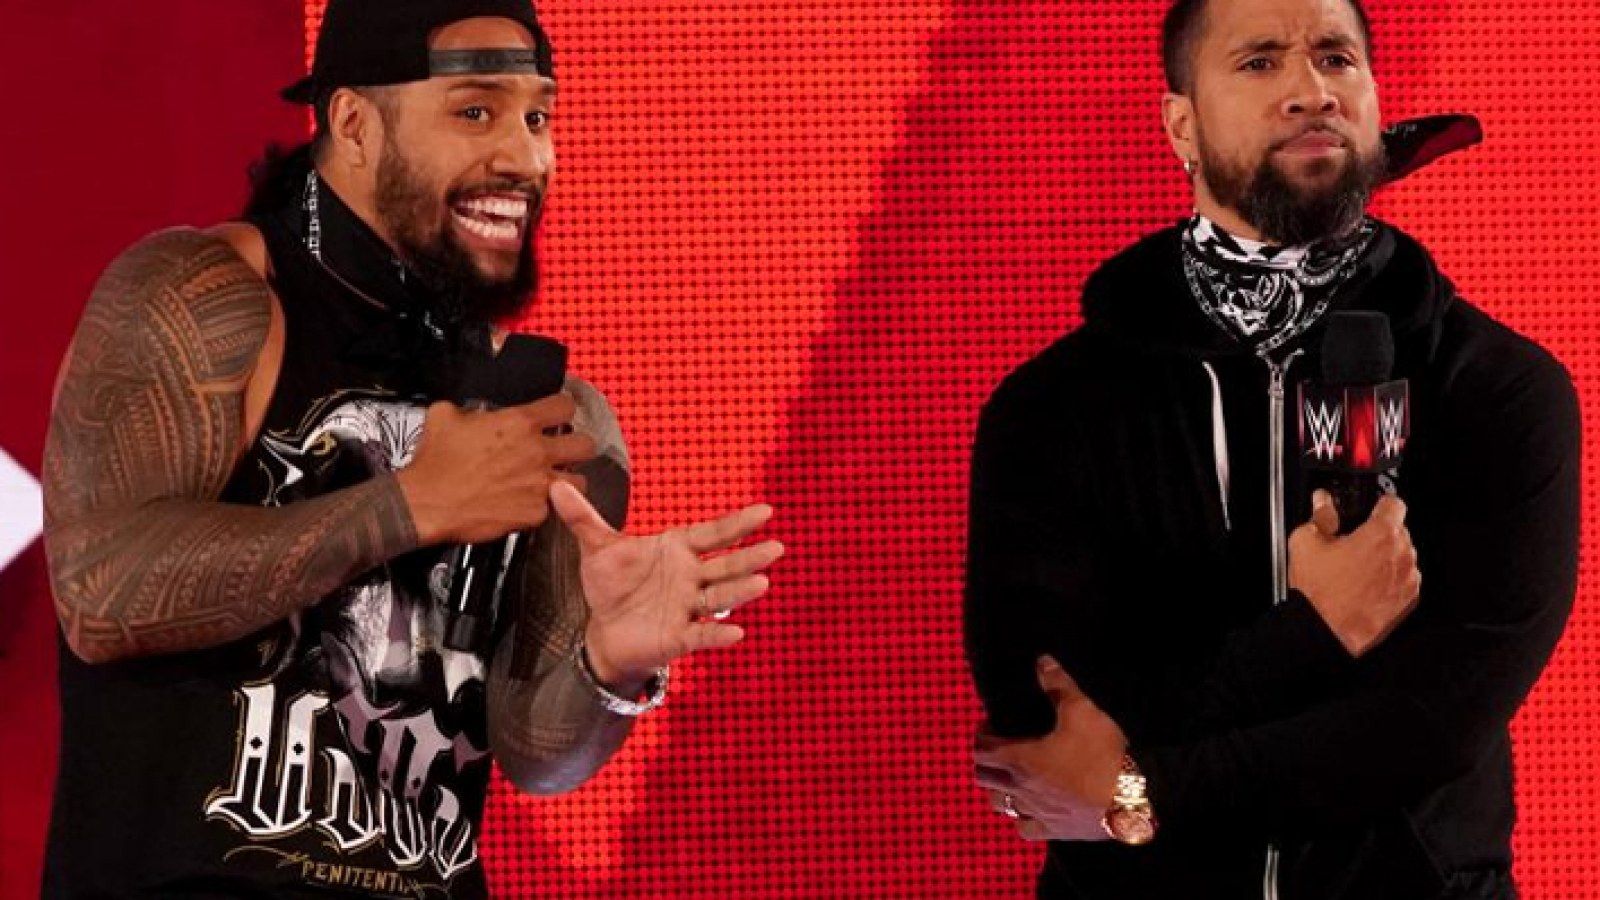 WWE Superstar Jimmy Uso Arrested for DUI in Florida, Company Releases Statement